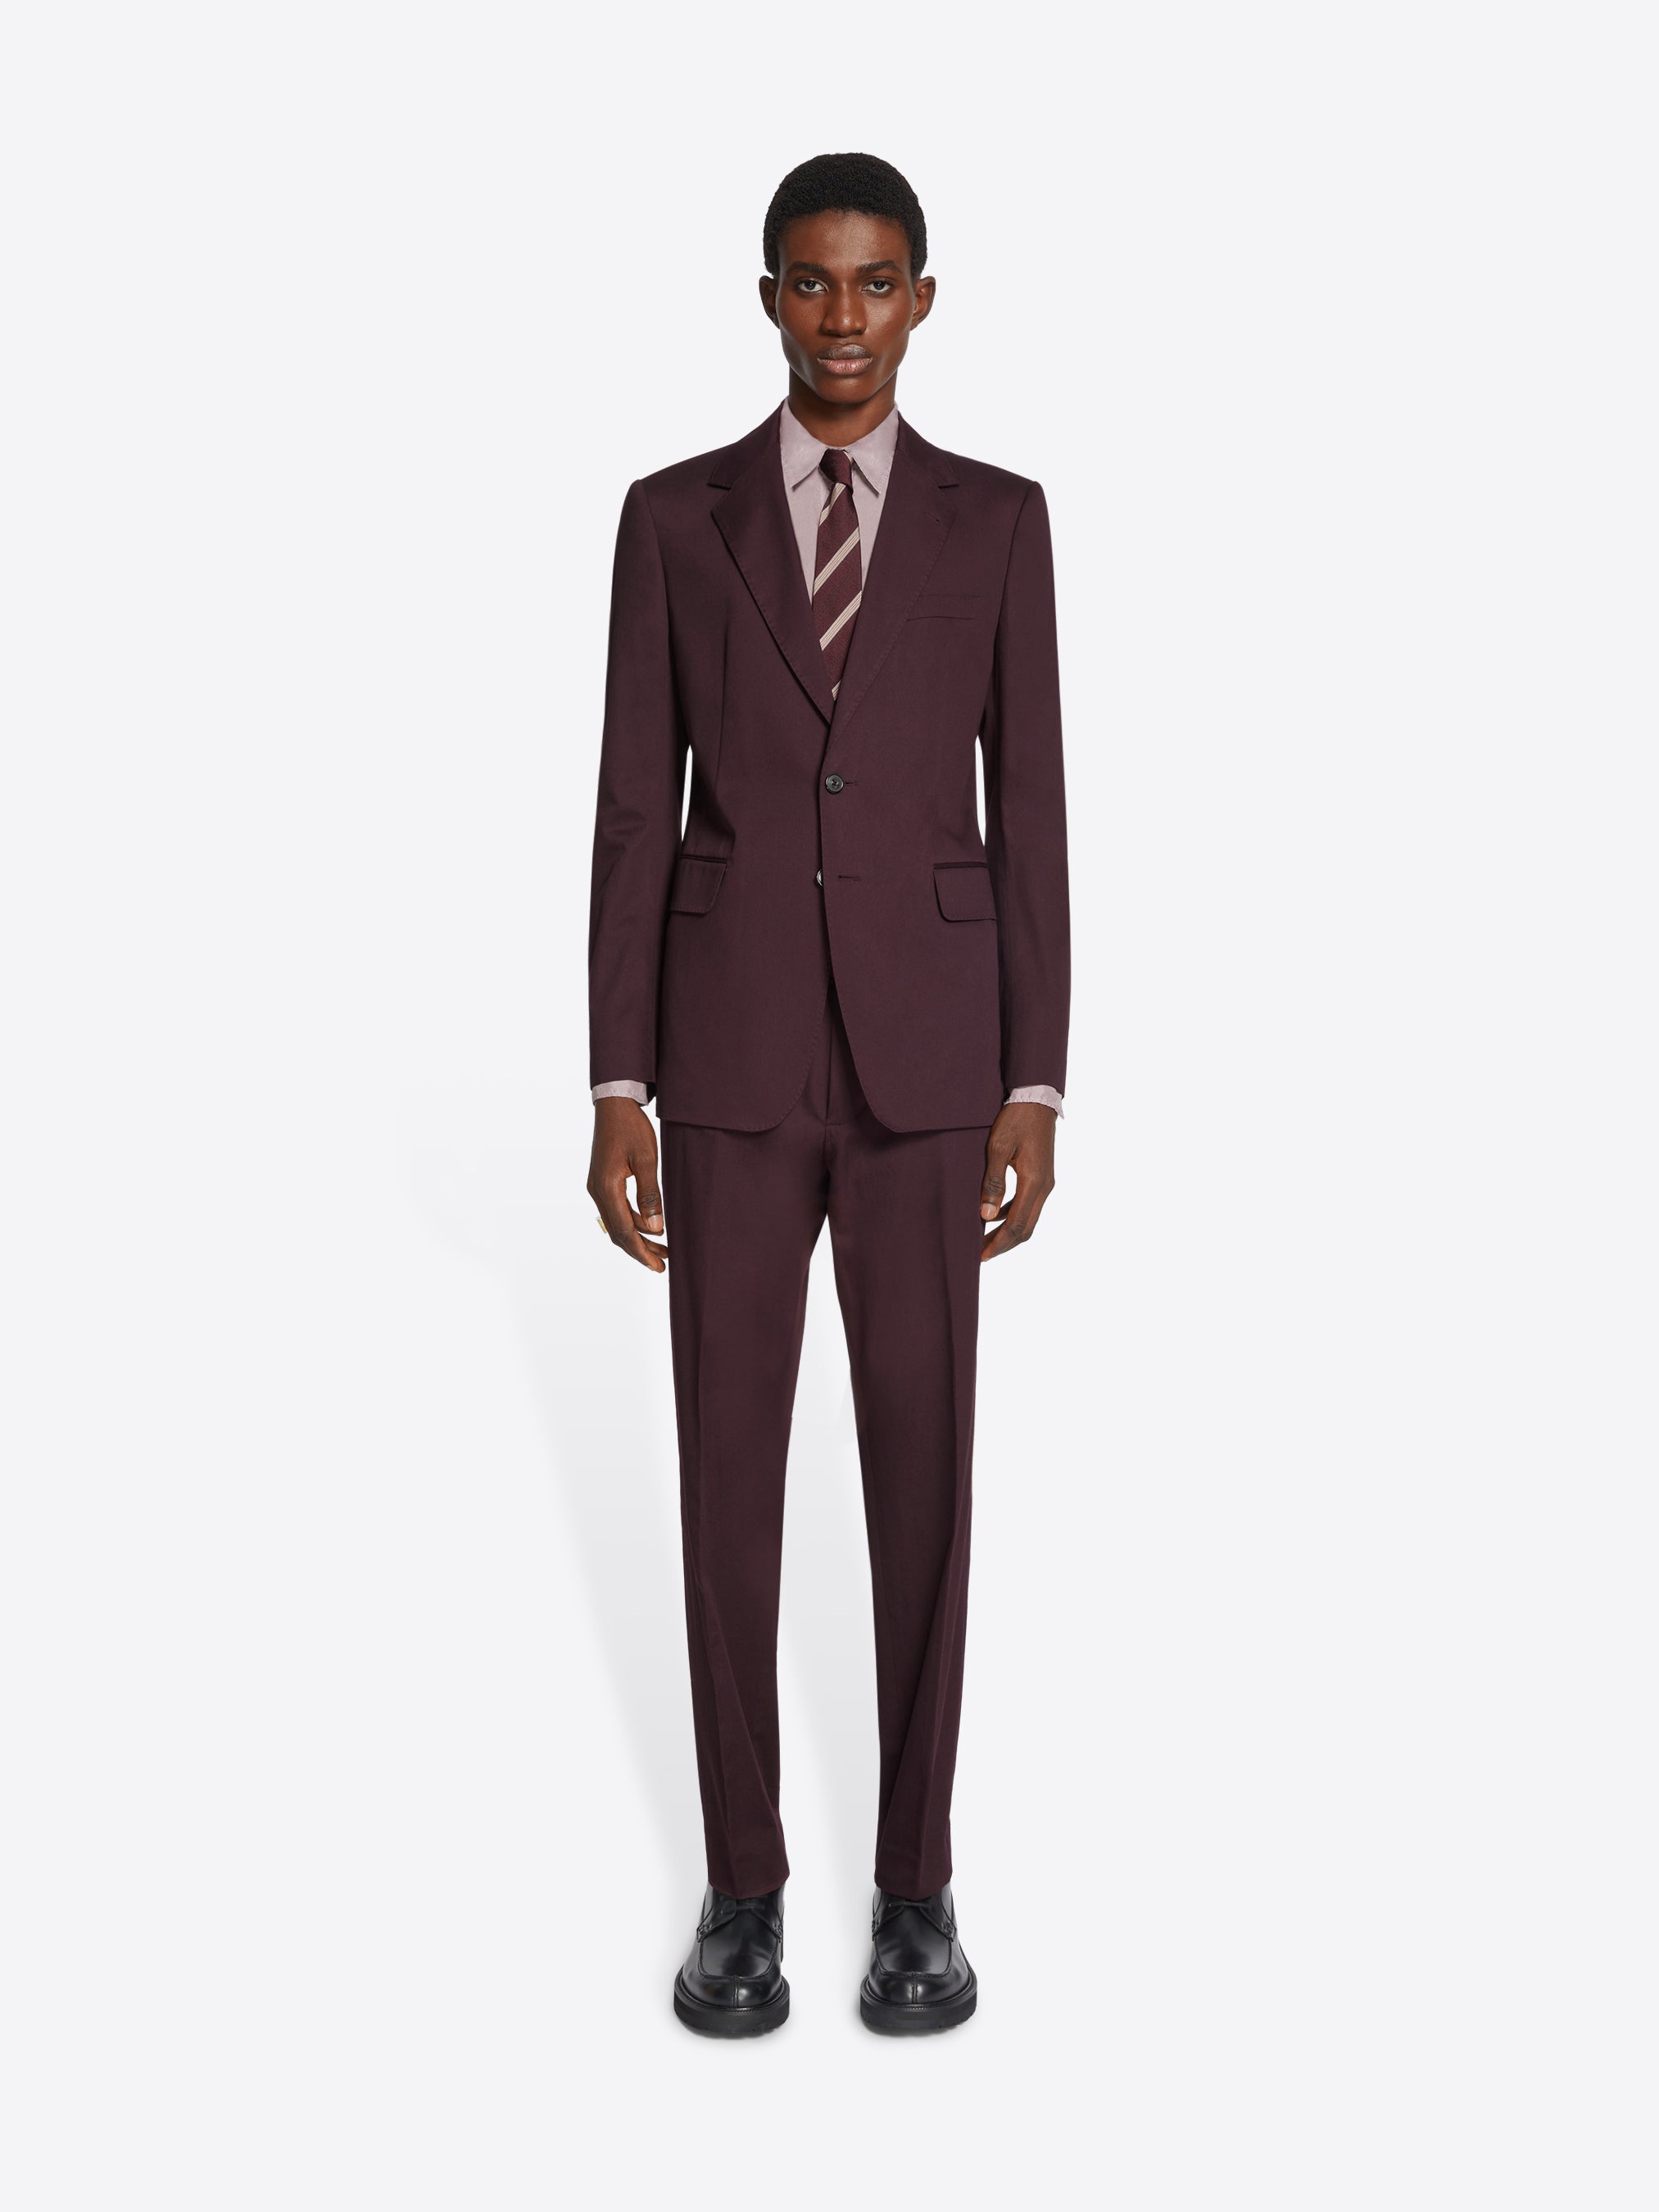 Ultimate Guide To Buying A Suit | Style, Fit And Accessories